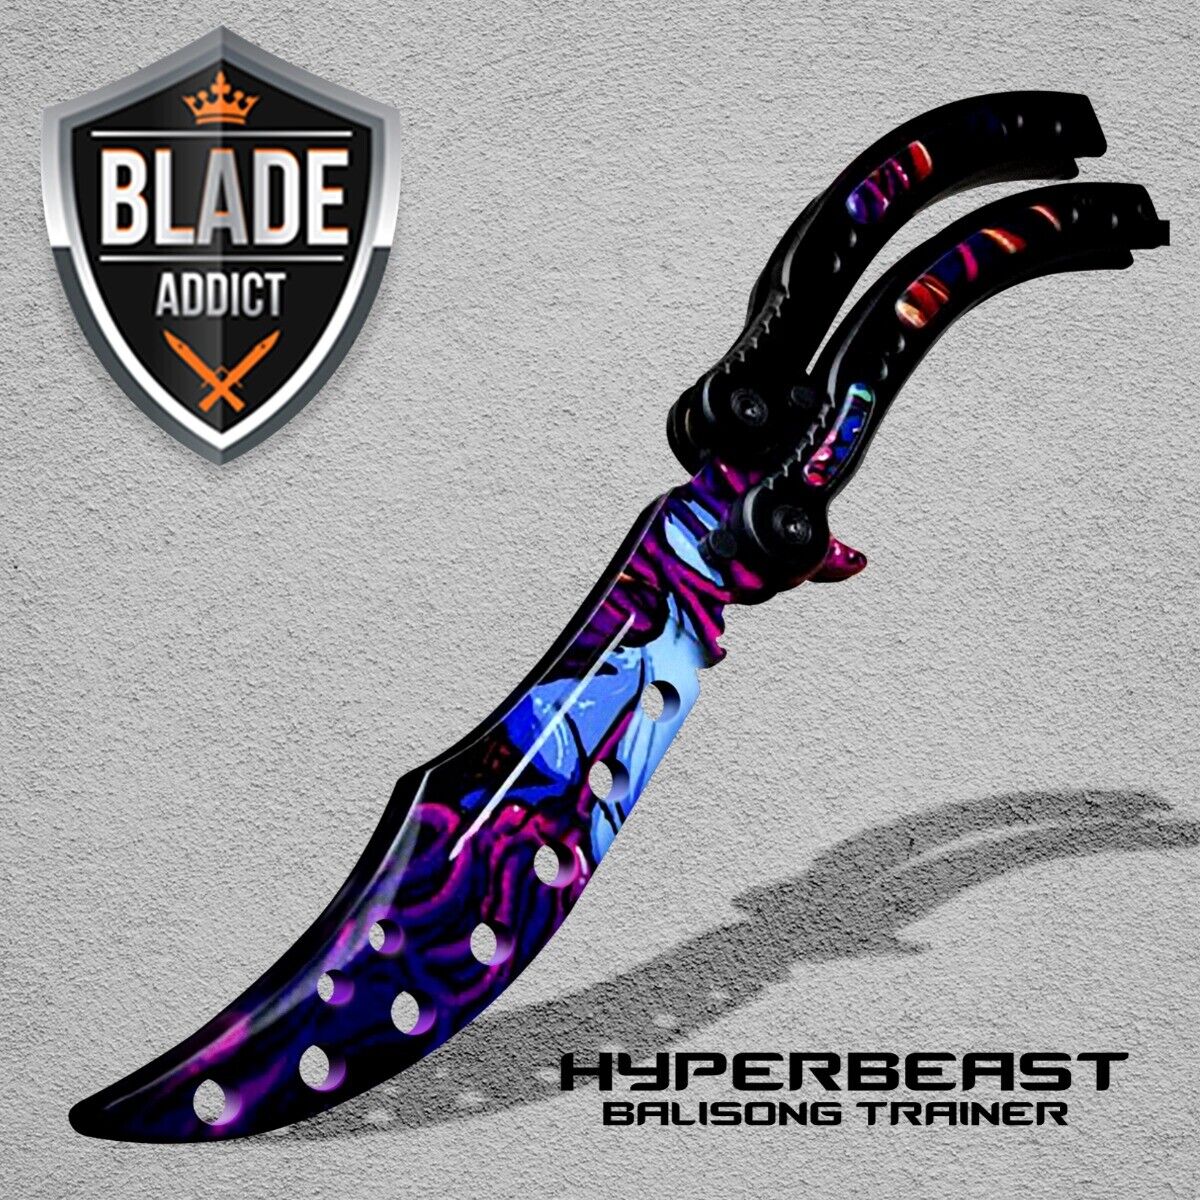 CSGO Practice Knife Balisong Butterfly Trainer Blade - Dull - HYPERBEAST